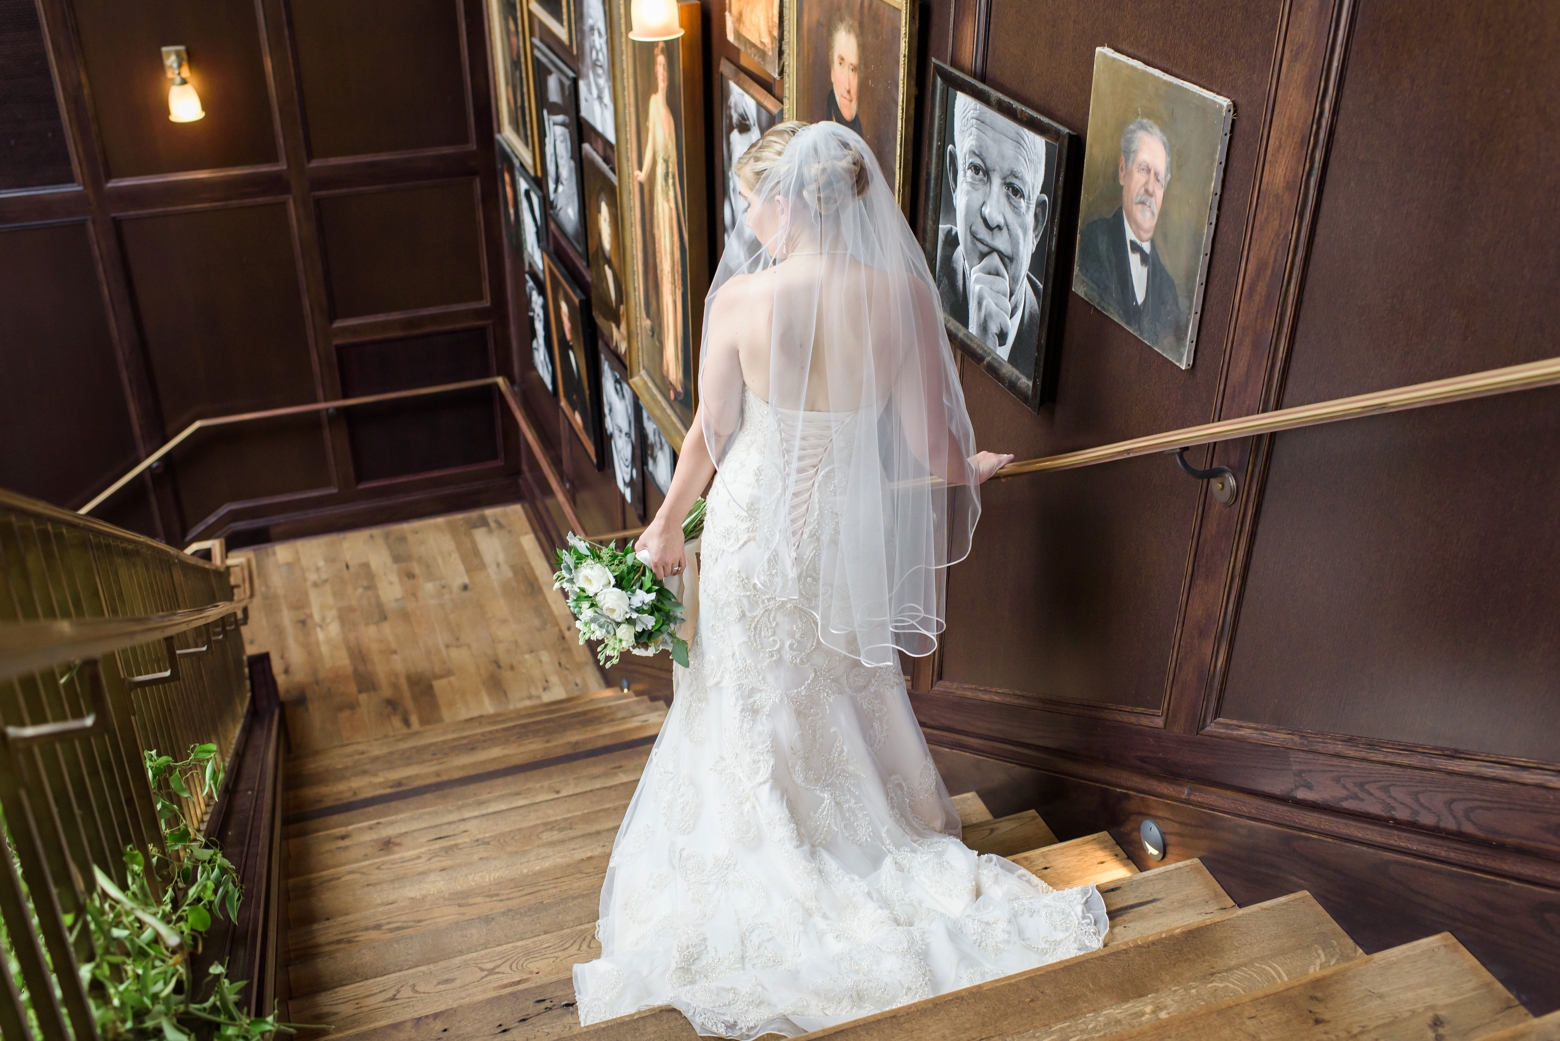 The Bride descends the designed portrait staircase of Oxford Exchange